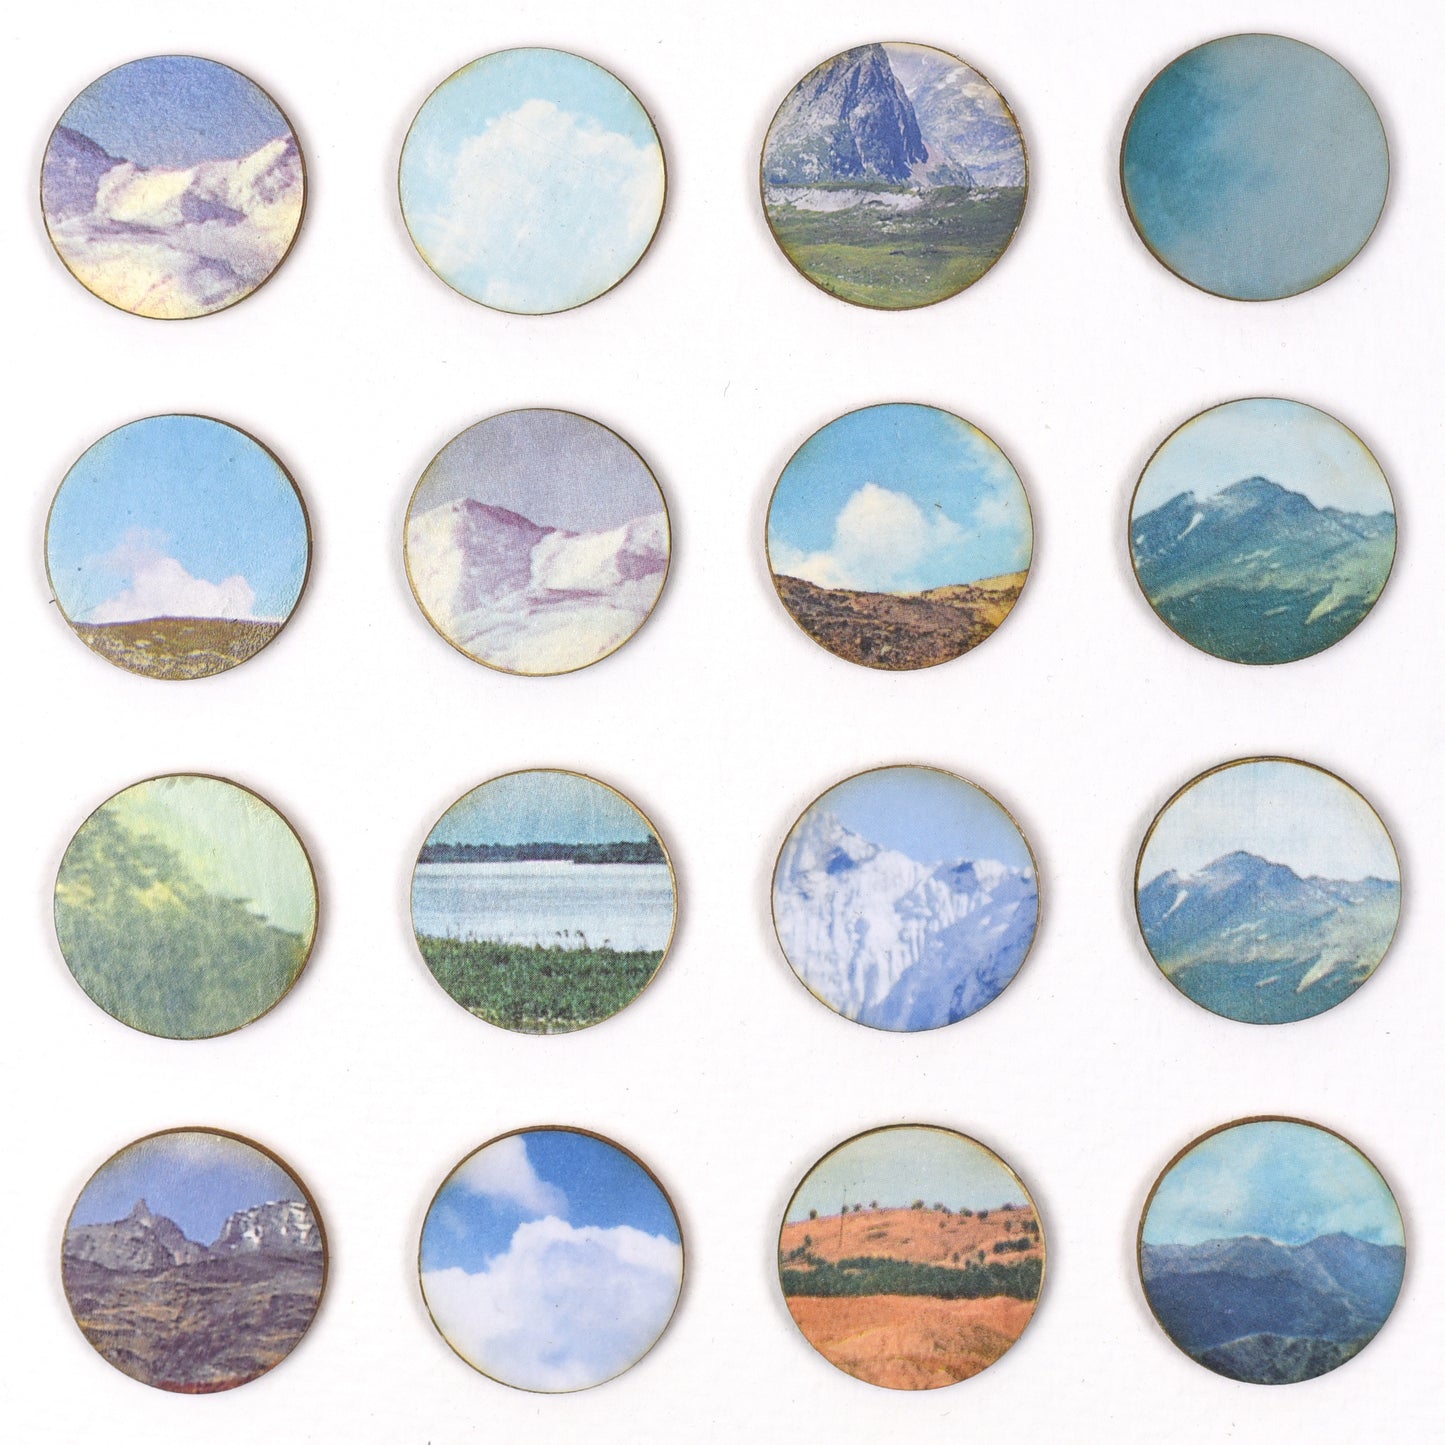 One Hundred Snowy Mountain Landscape Dots Collage